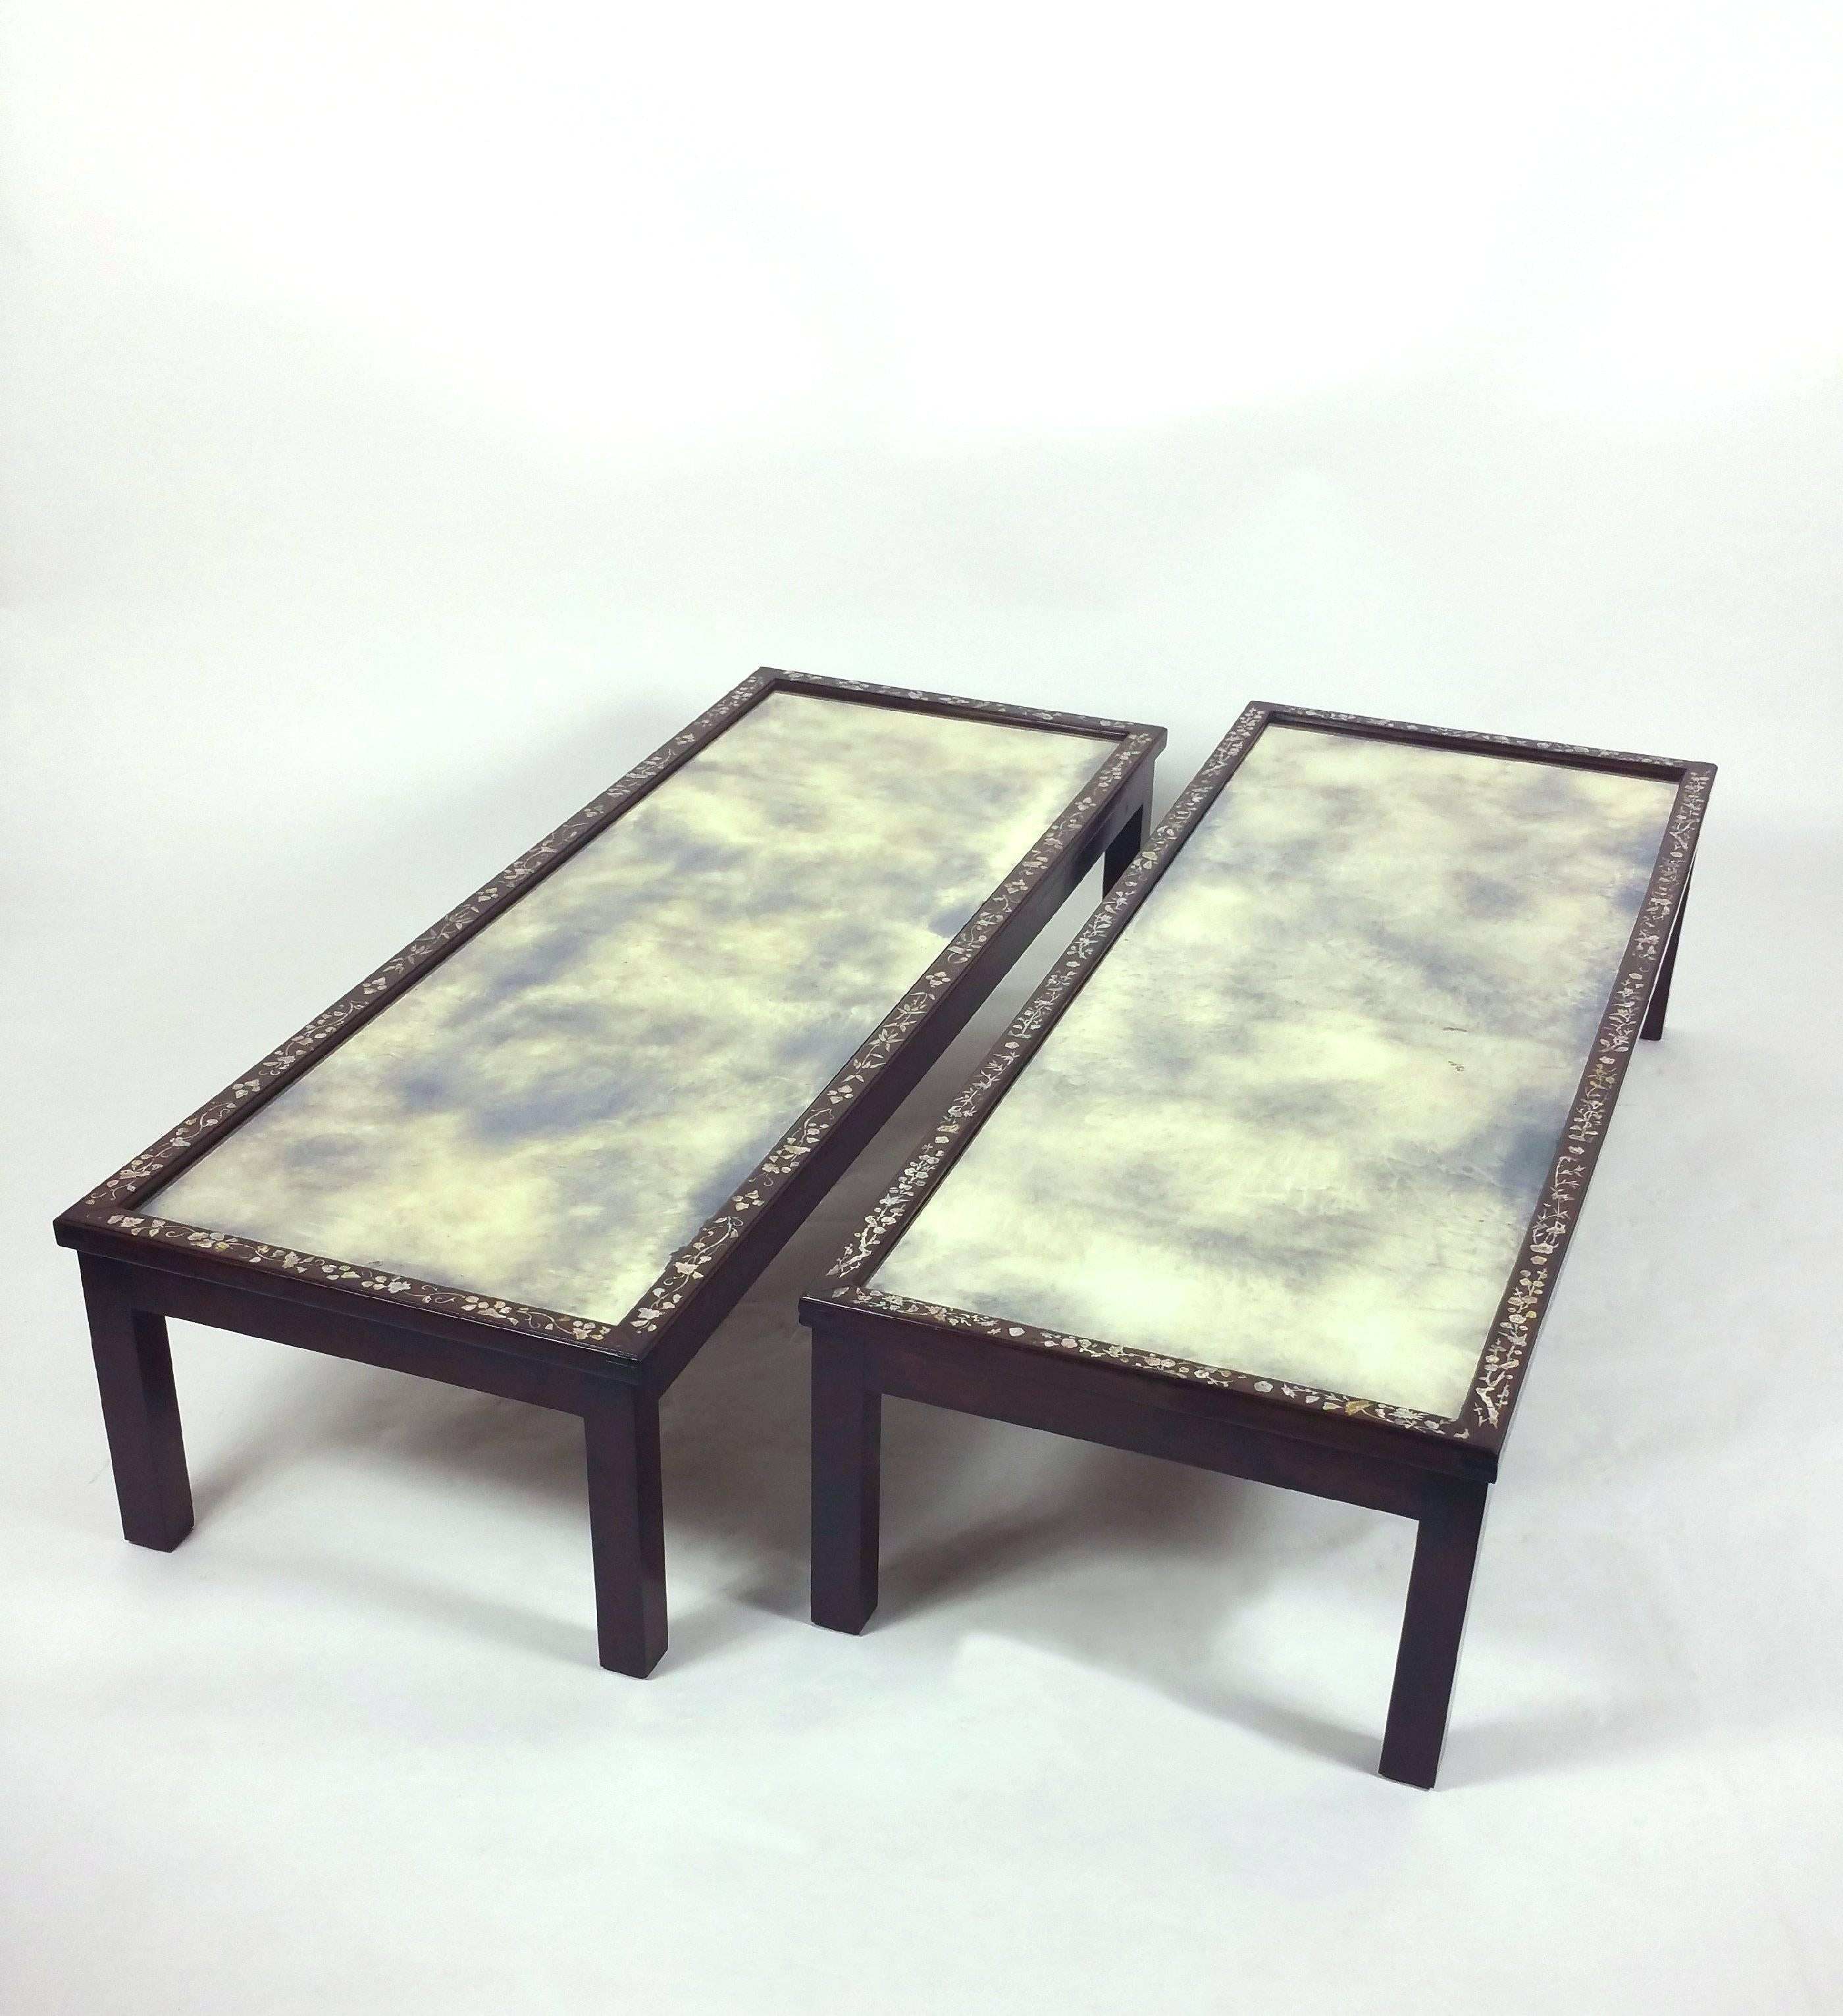 Fine Pair of 19th Century Chinese Hardwood Coffee Tables In Good Condition For Sale In London, west Sussex